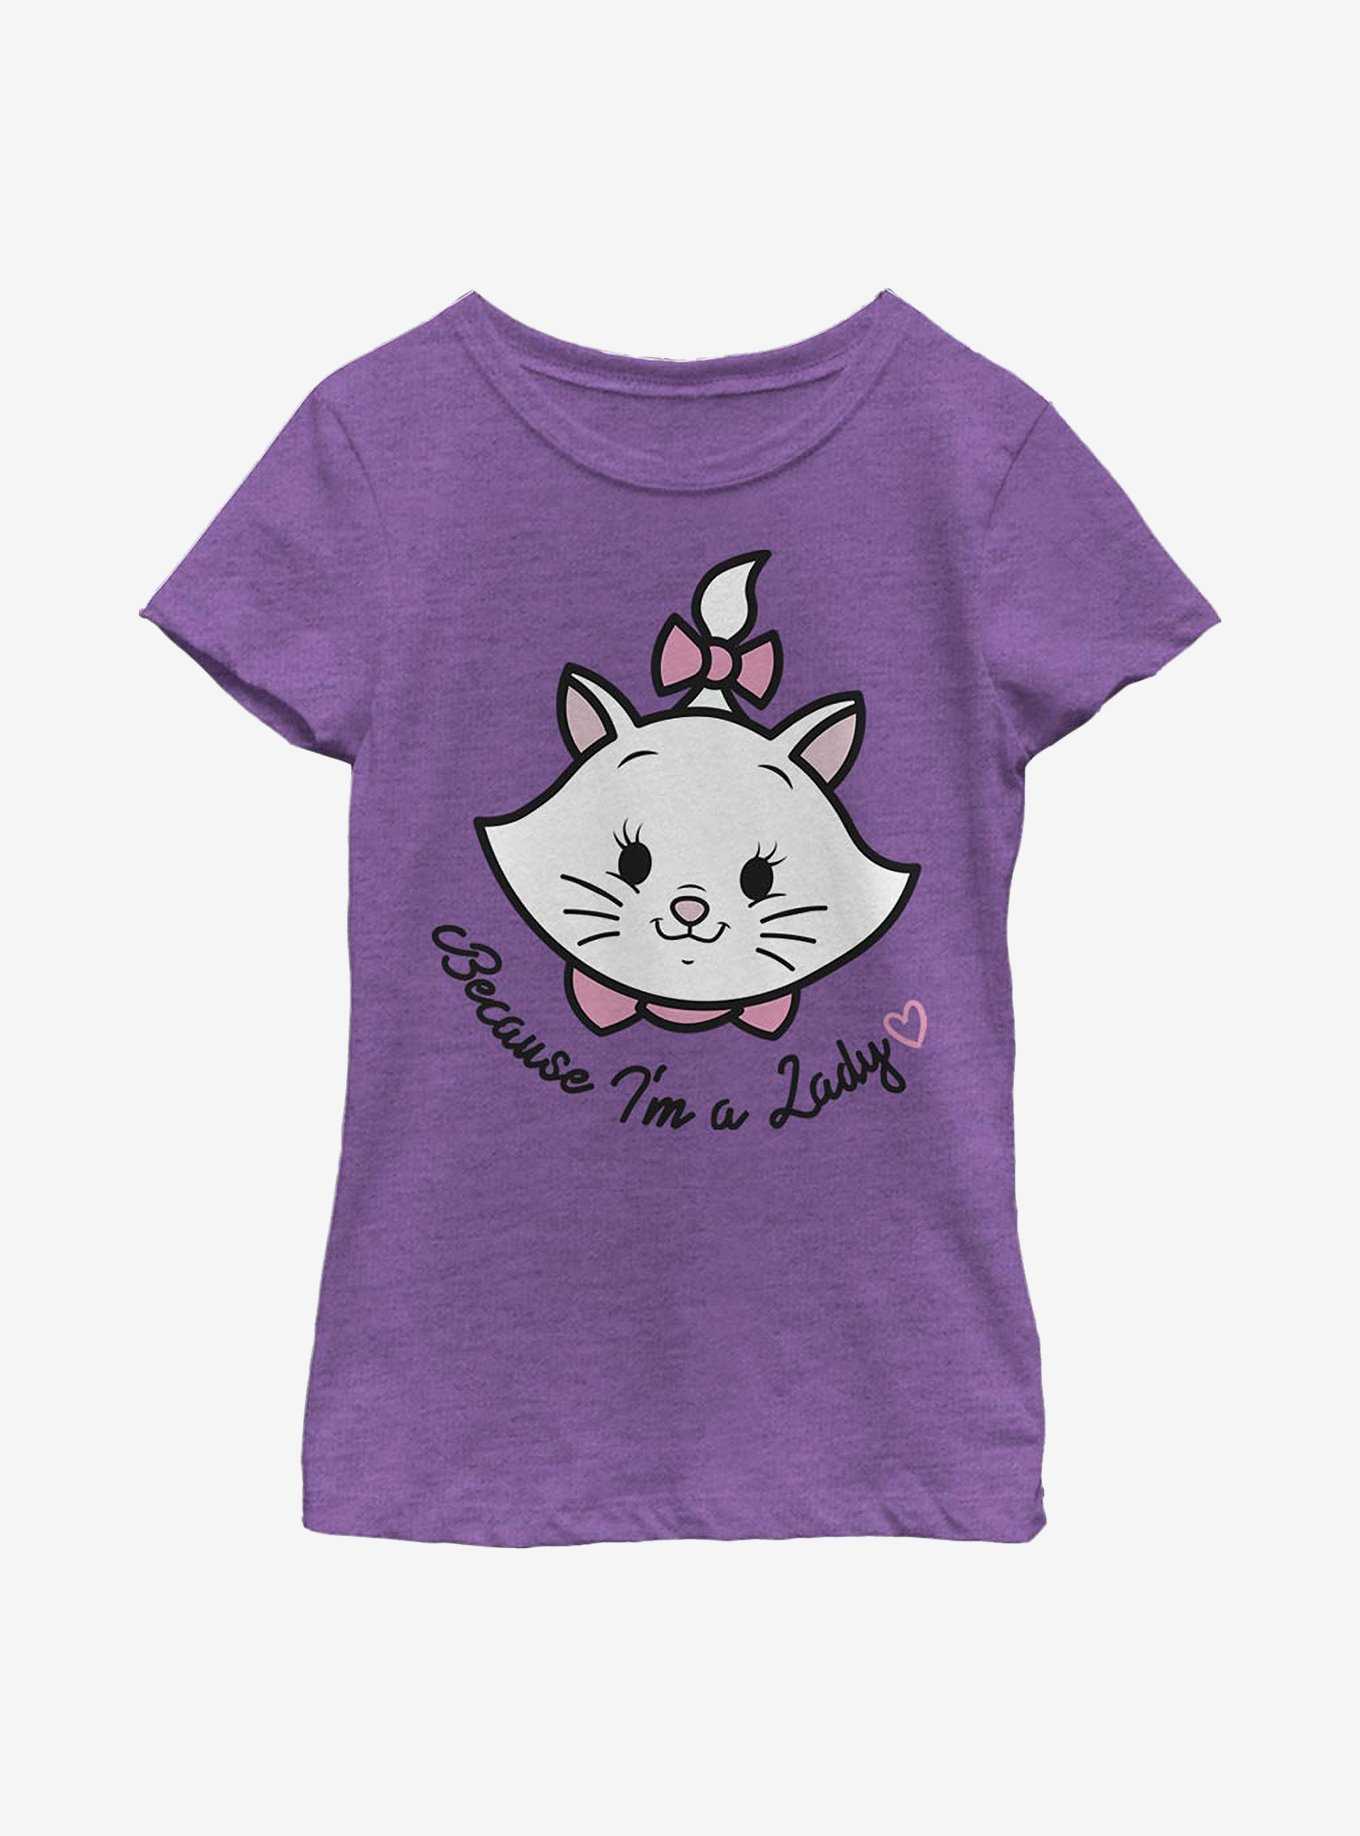 Disney The Aristocats Lady Faux Pocket Youth Girls T-Shirt, , hi-res